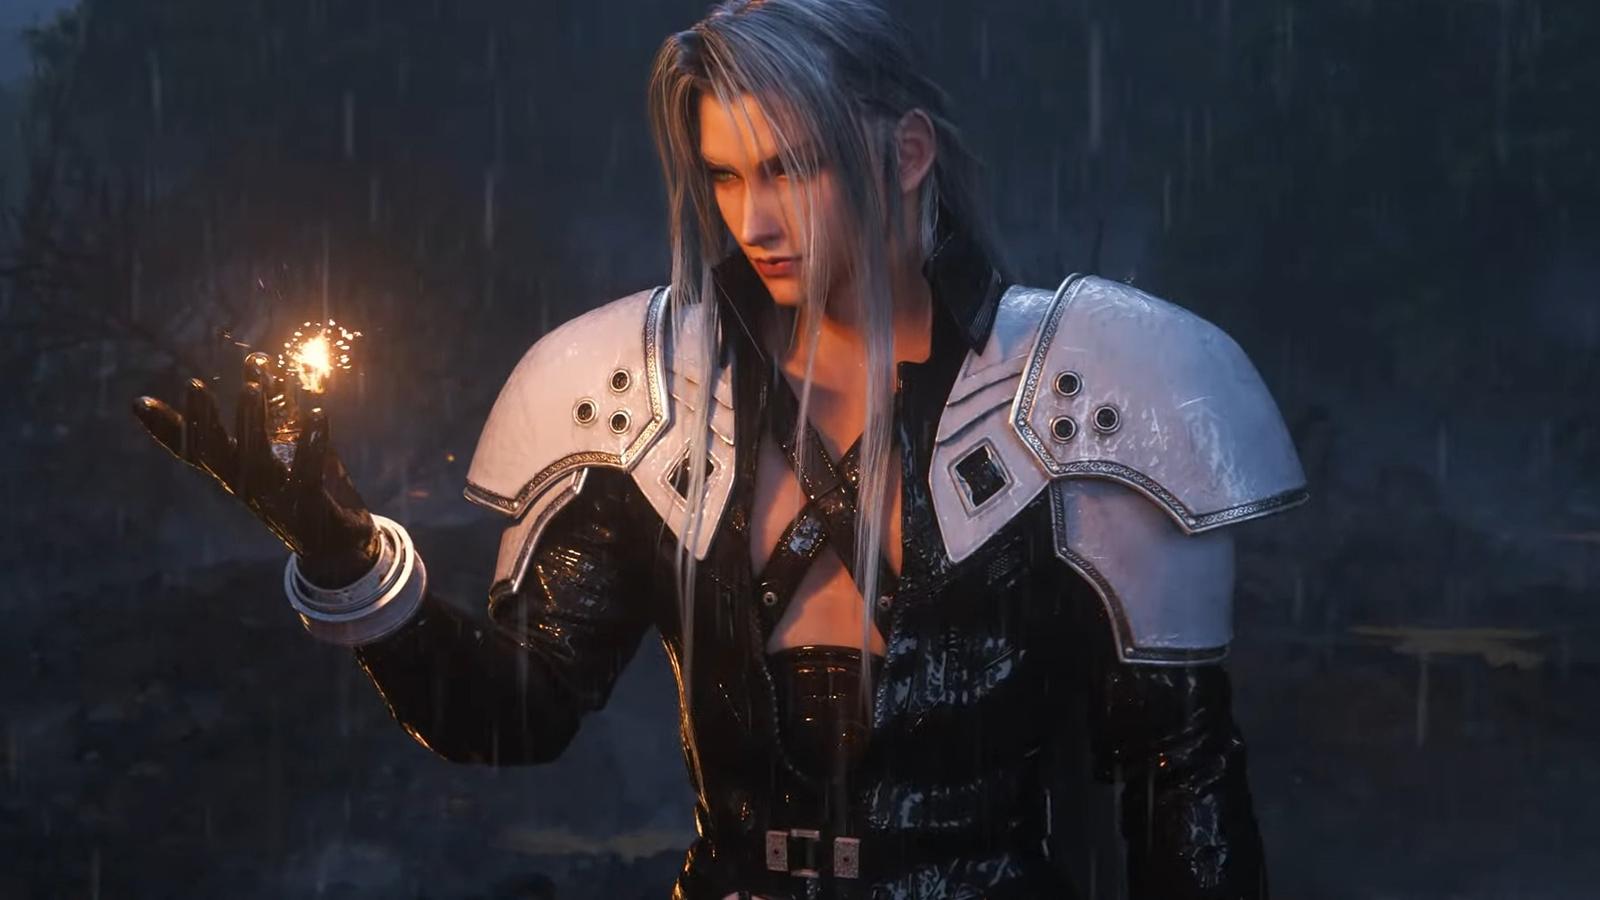 Final Fantasy 7 Ever Crisis update adds to backstory of Sephiroth